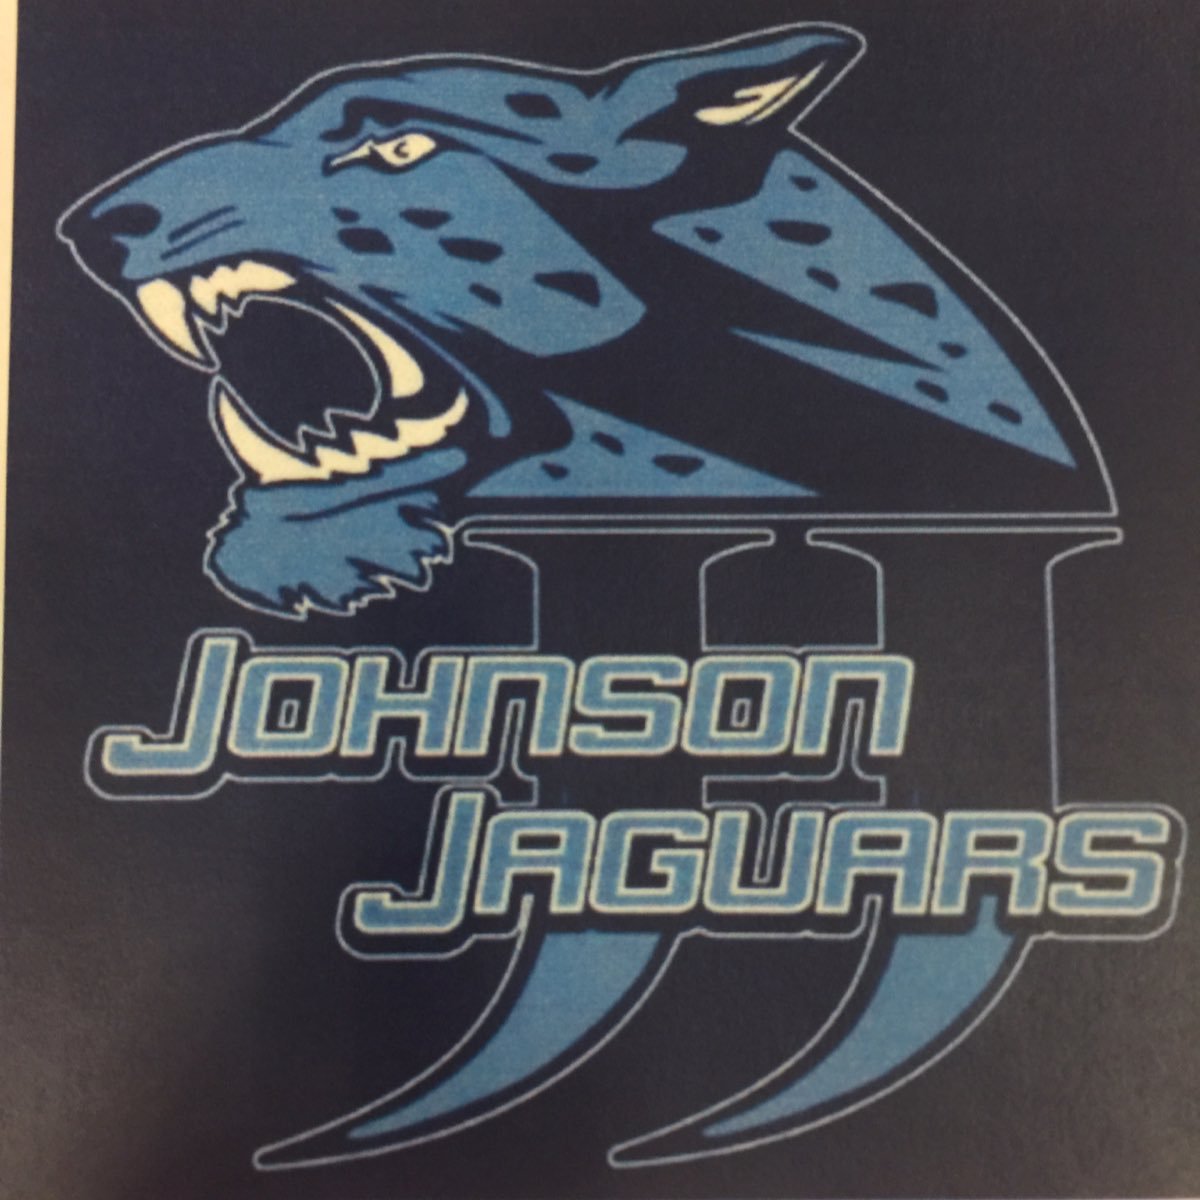 Follow us to stay up-to-date with activities in the Johnson High School Library!!